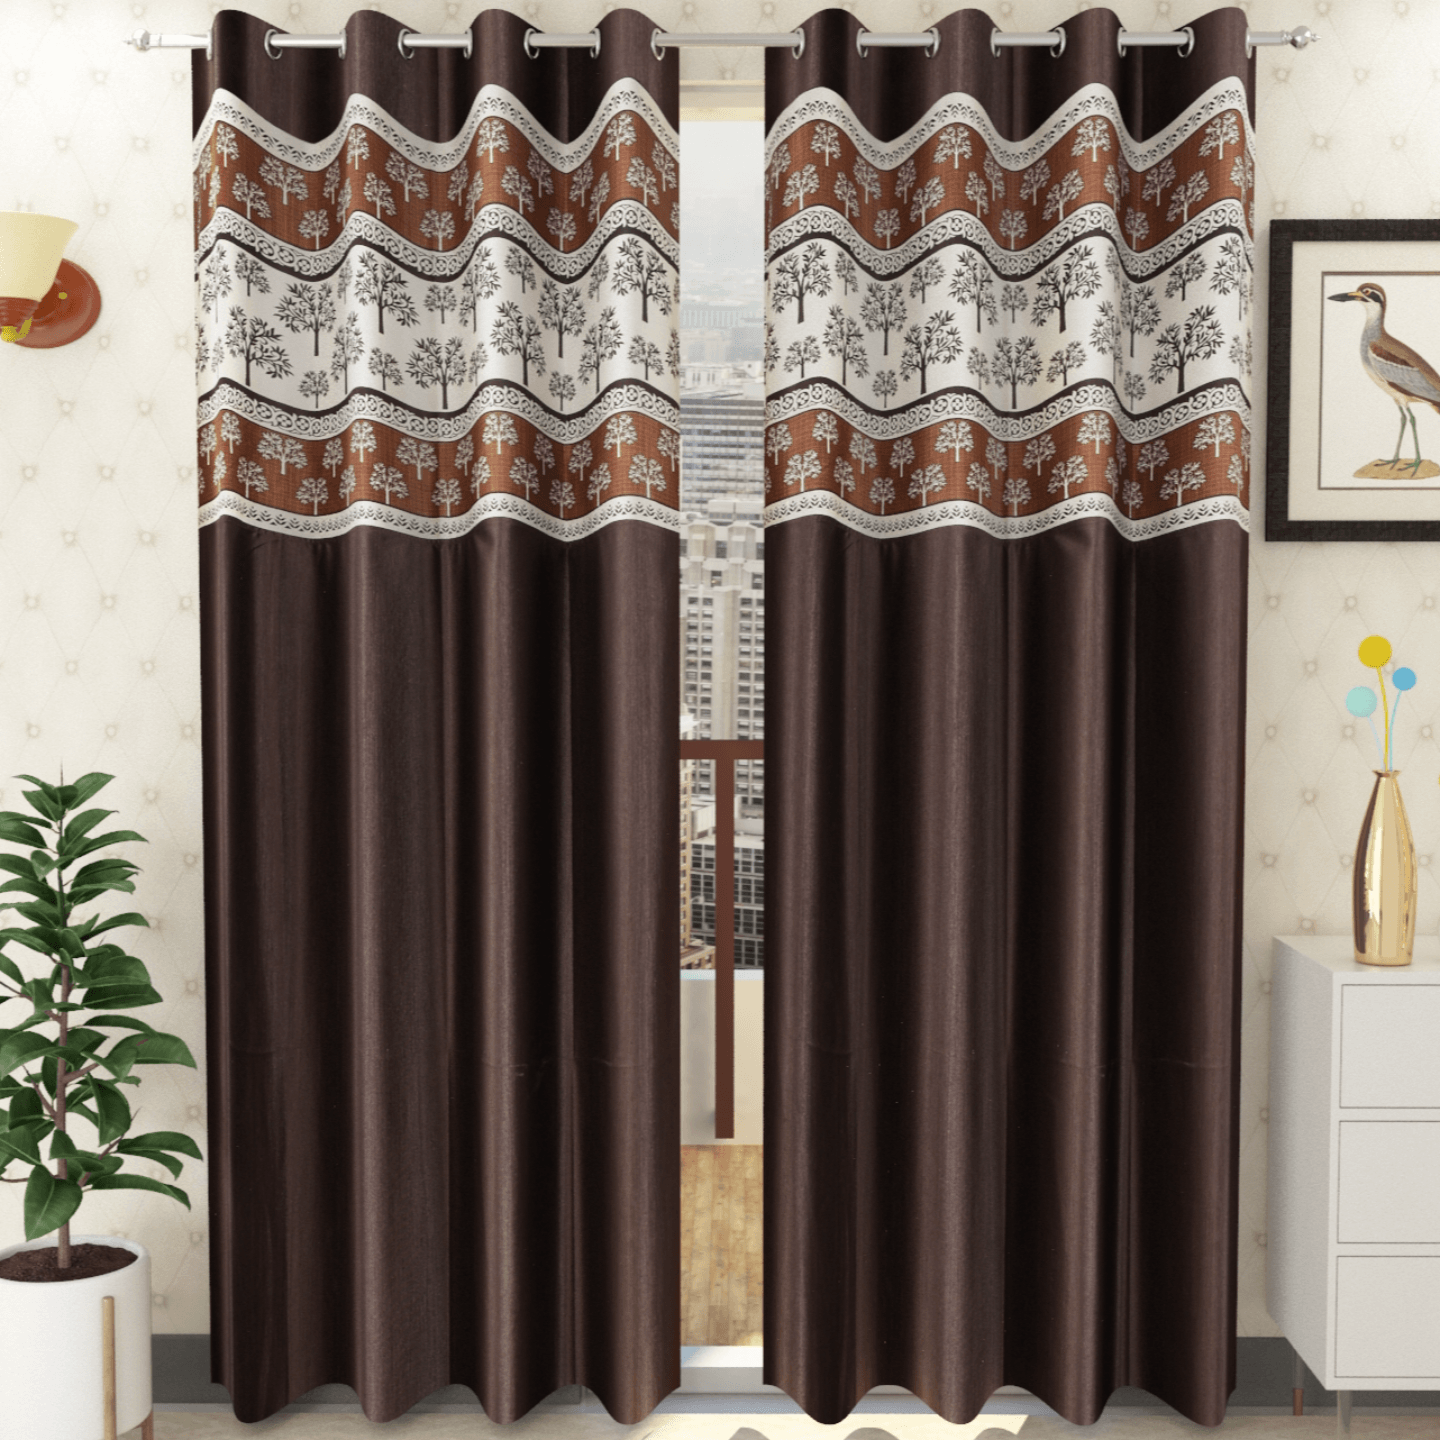 Handtex Home Tree design Patchwork curtain for door 7 feet set of 2pc Coffee color